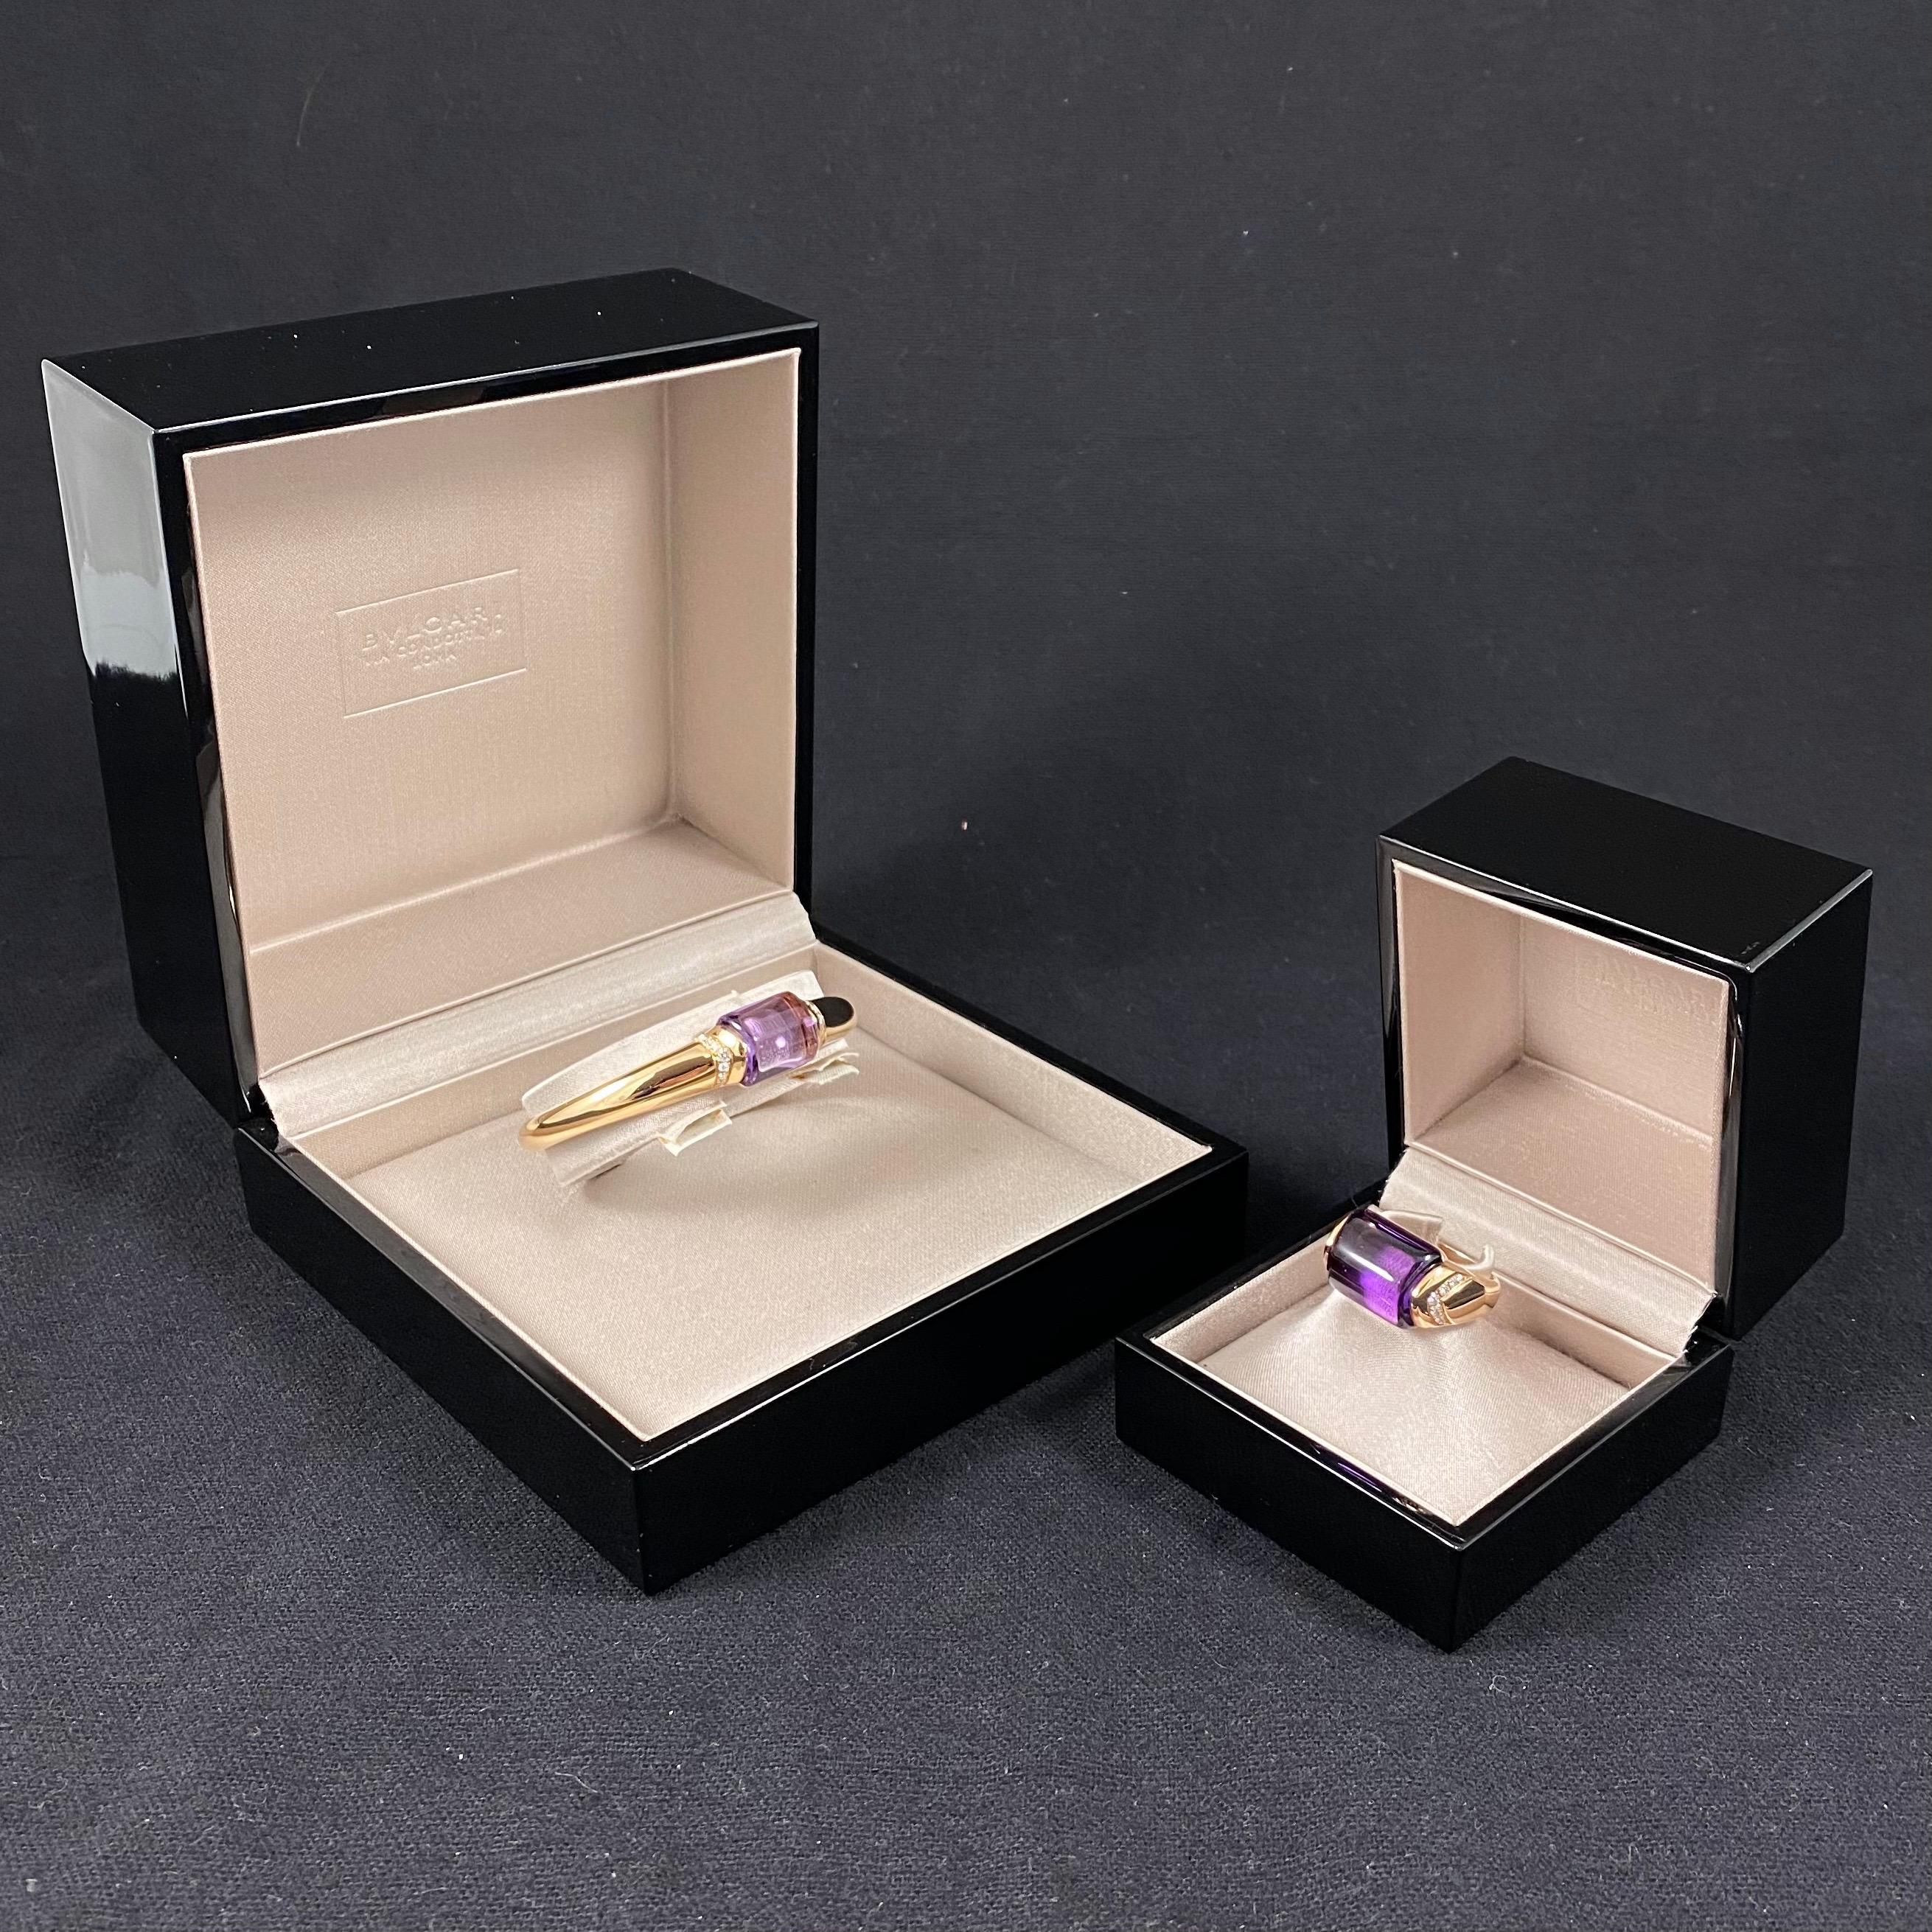 Bulgari/Bvlgari 'MVSA' amethyst and diamond jewelry set composed of a ring and a cuff bangle bracelet in 18K rose gold, Italian, circa 2014, each with maker’s case. The ring of a domed design features a central takhti-cut vivid purple amethyst to